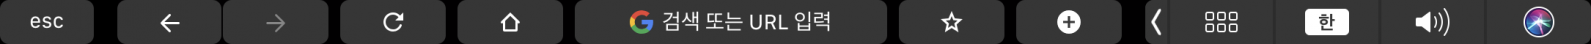 Touch Bar 스크린샷 2019-01-22 01.08.35.png